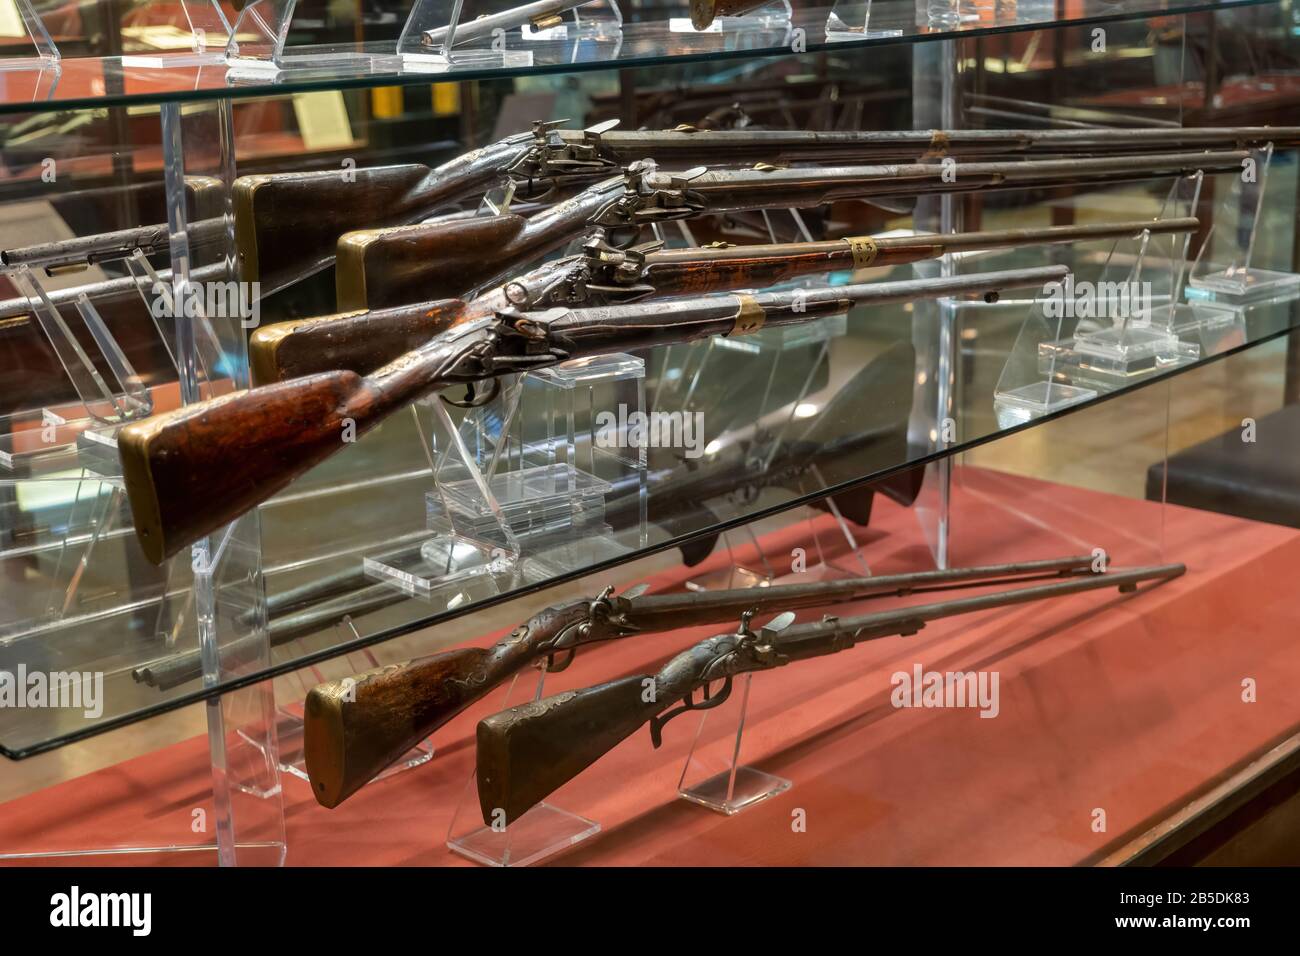 Muskets collection in Grandmaster Palace Armoury museum in Valletta, Malta Stock Photo